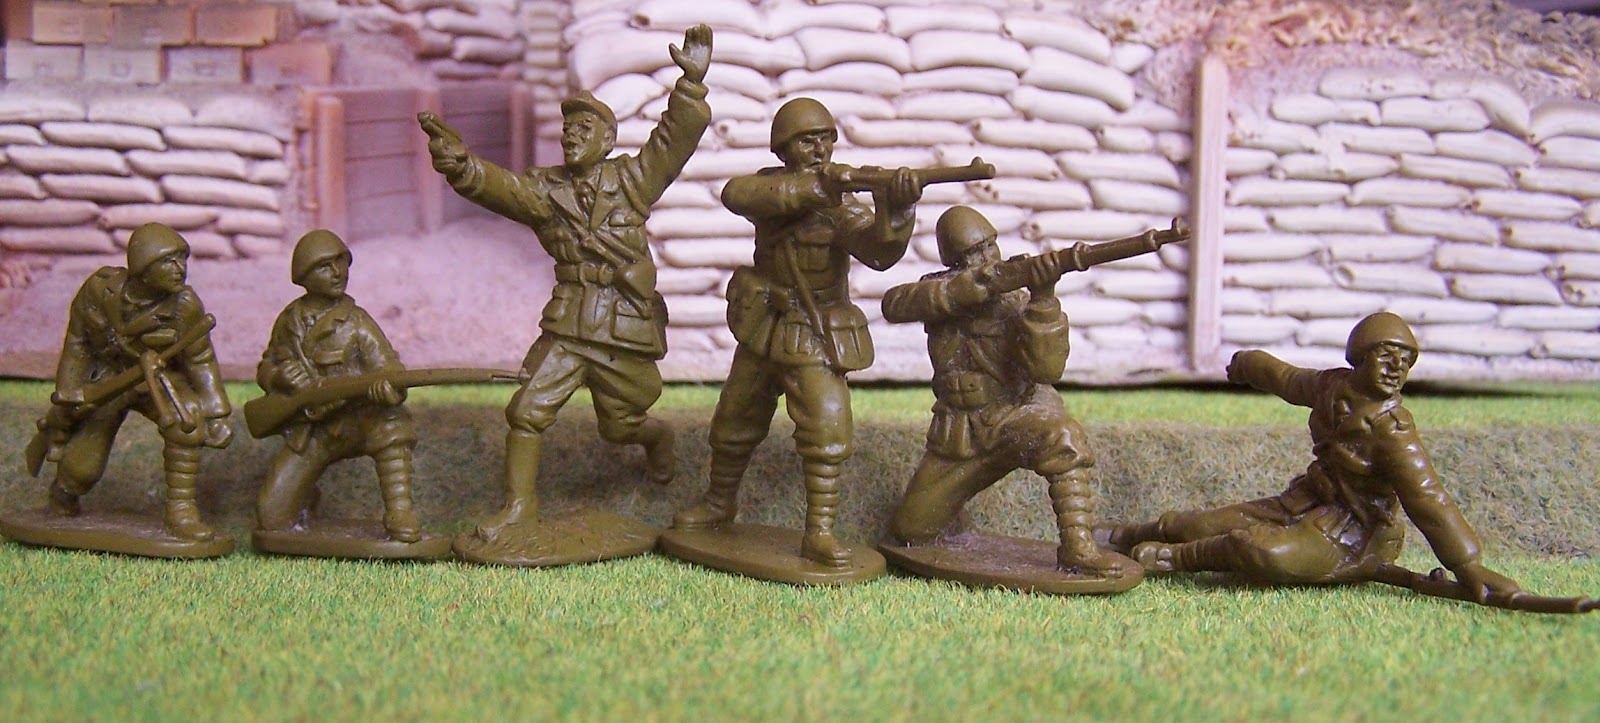 Wwii Plastic Toy Soldiers Classic Toy Soldiers Toy Soldiers